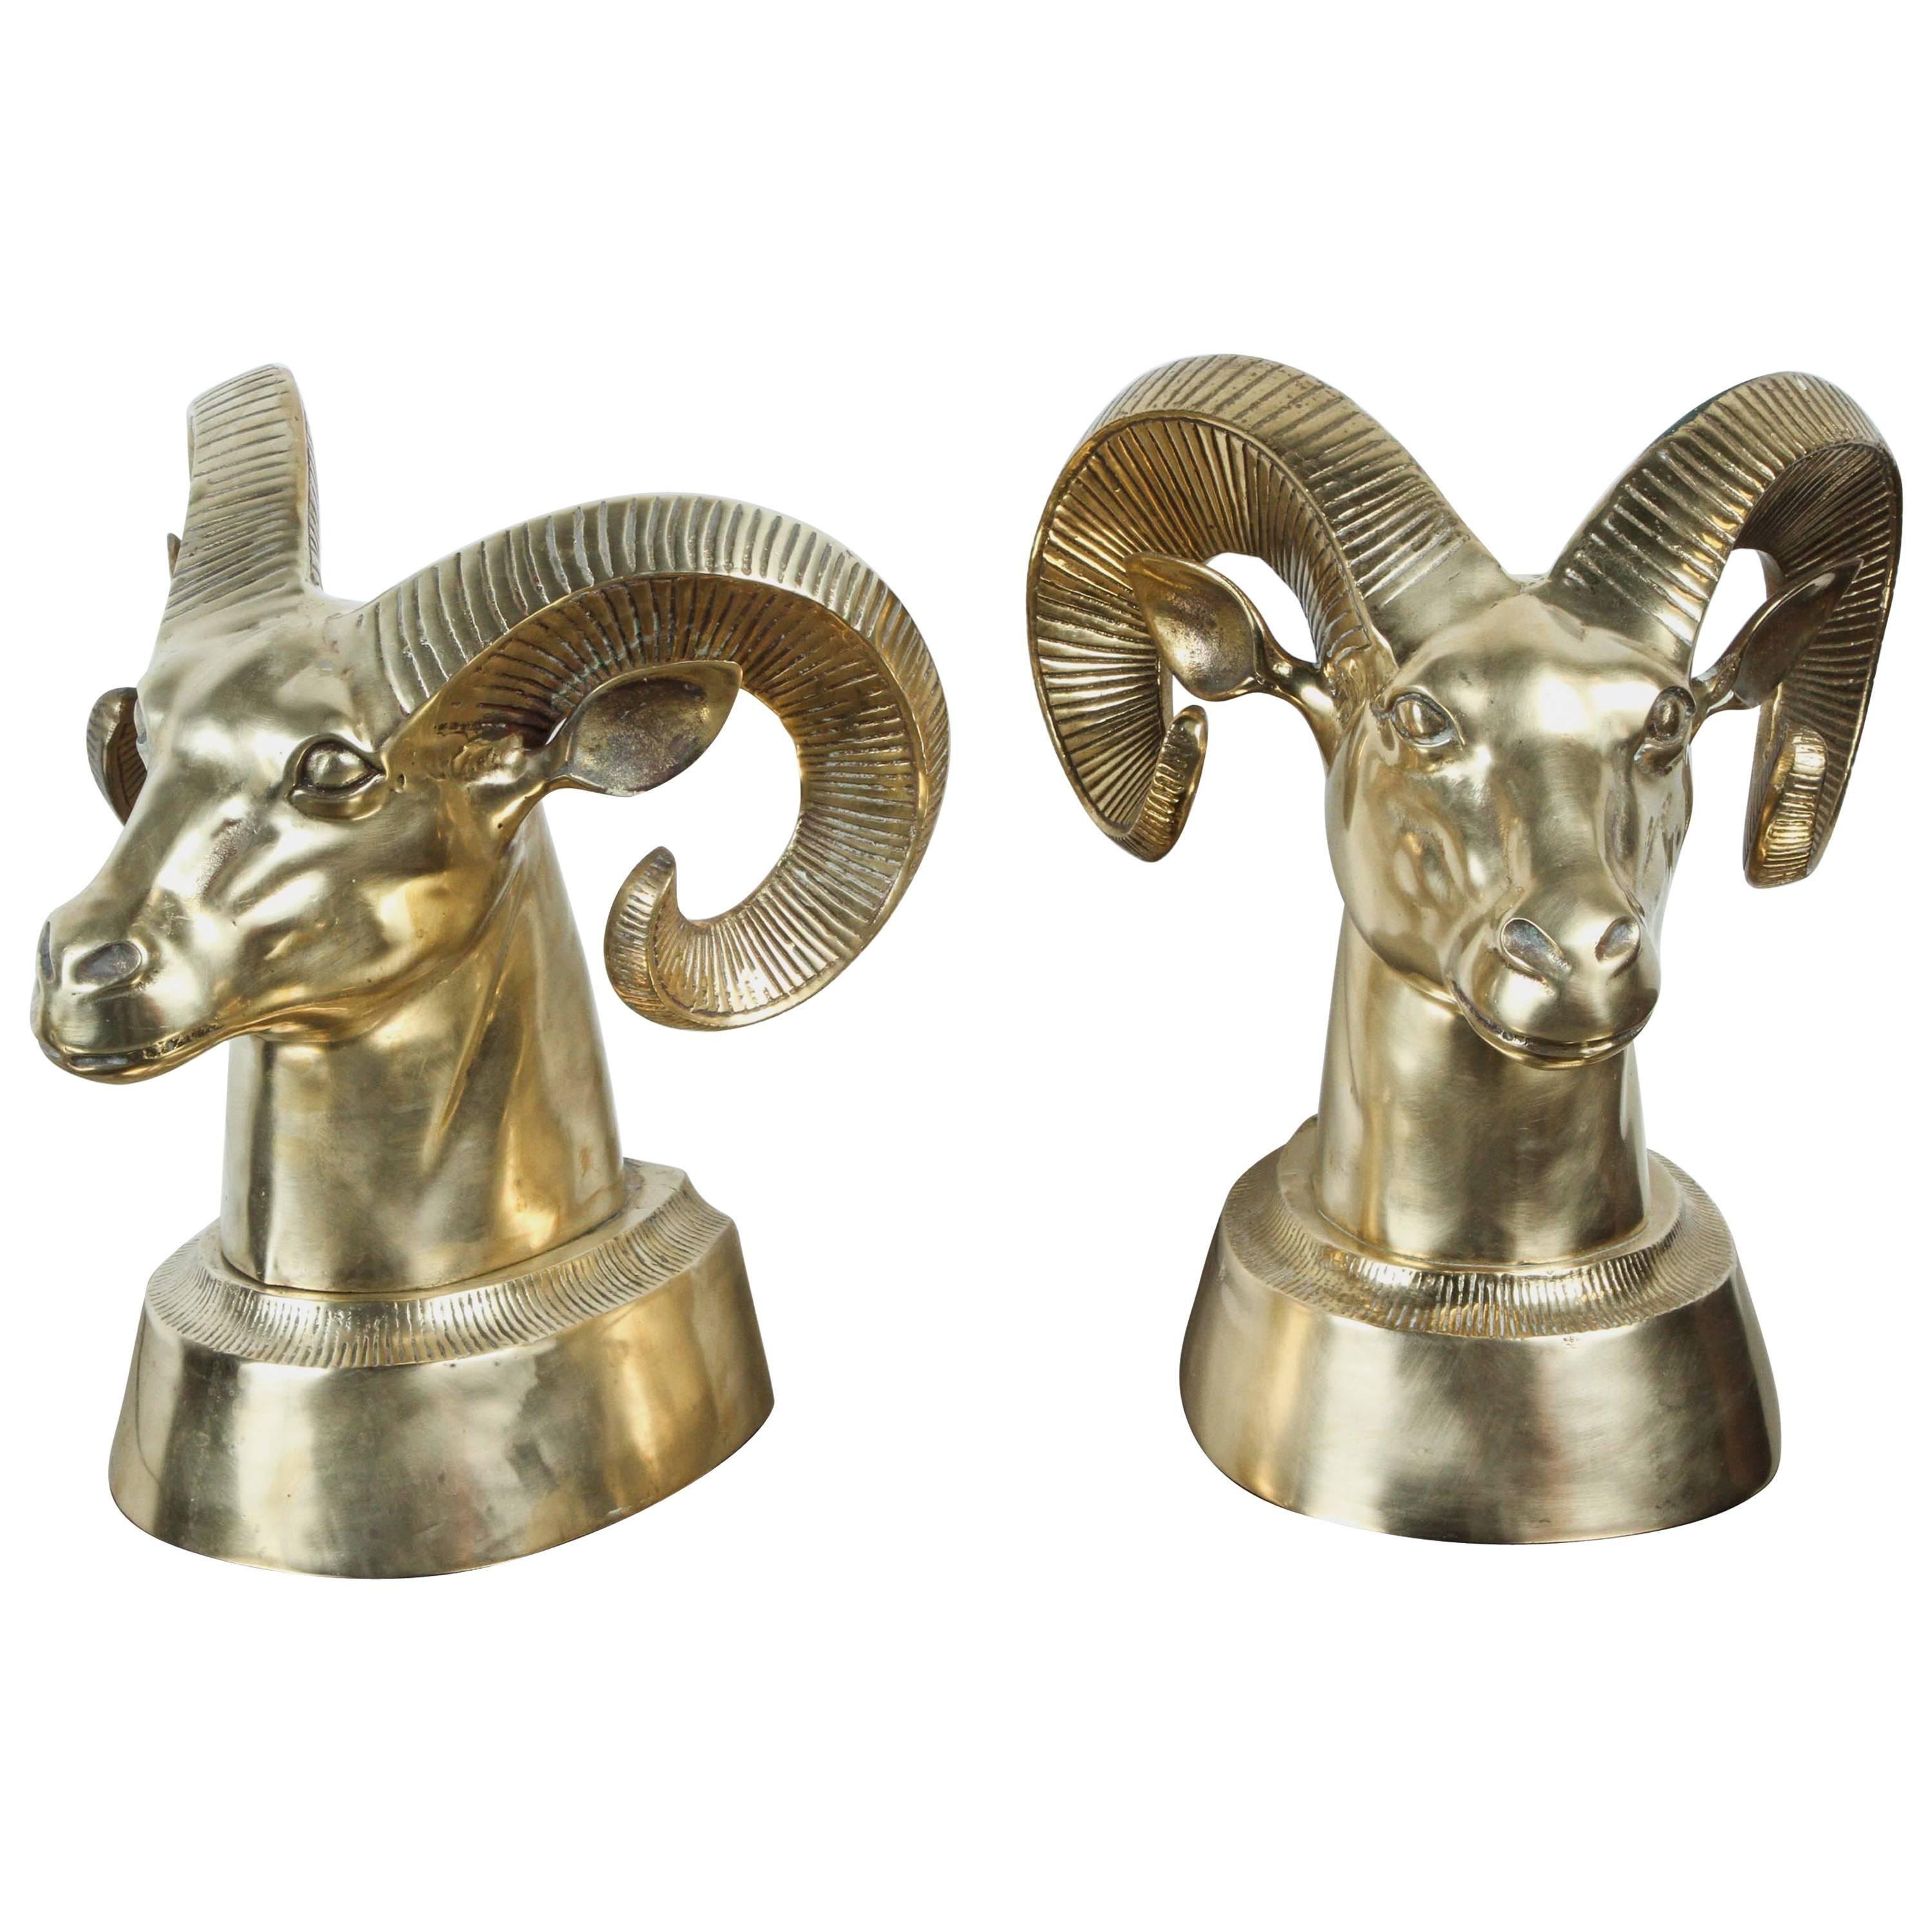 Pair of Large Decorative Brass Rams Heads / Bookends